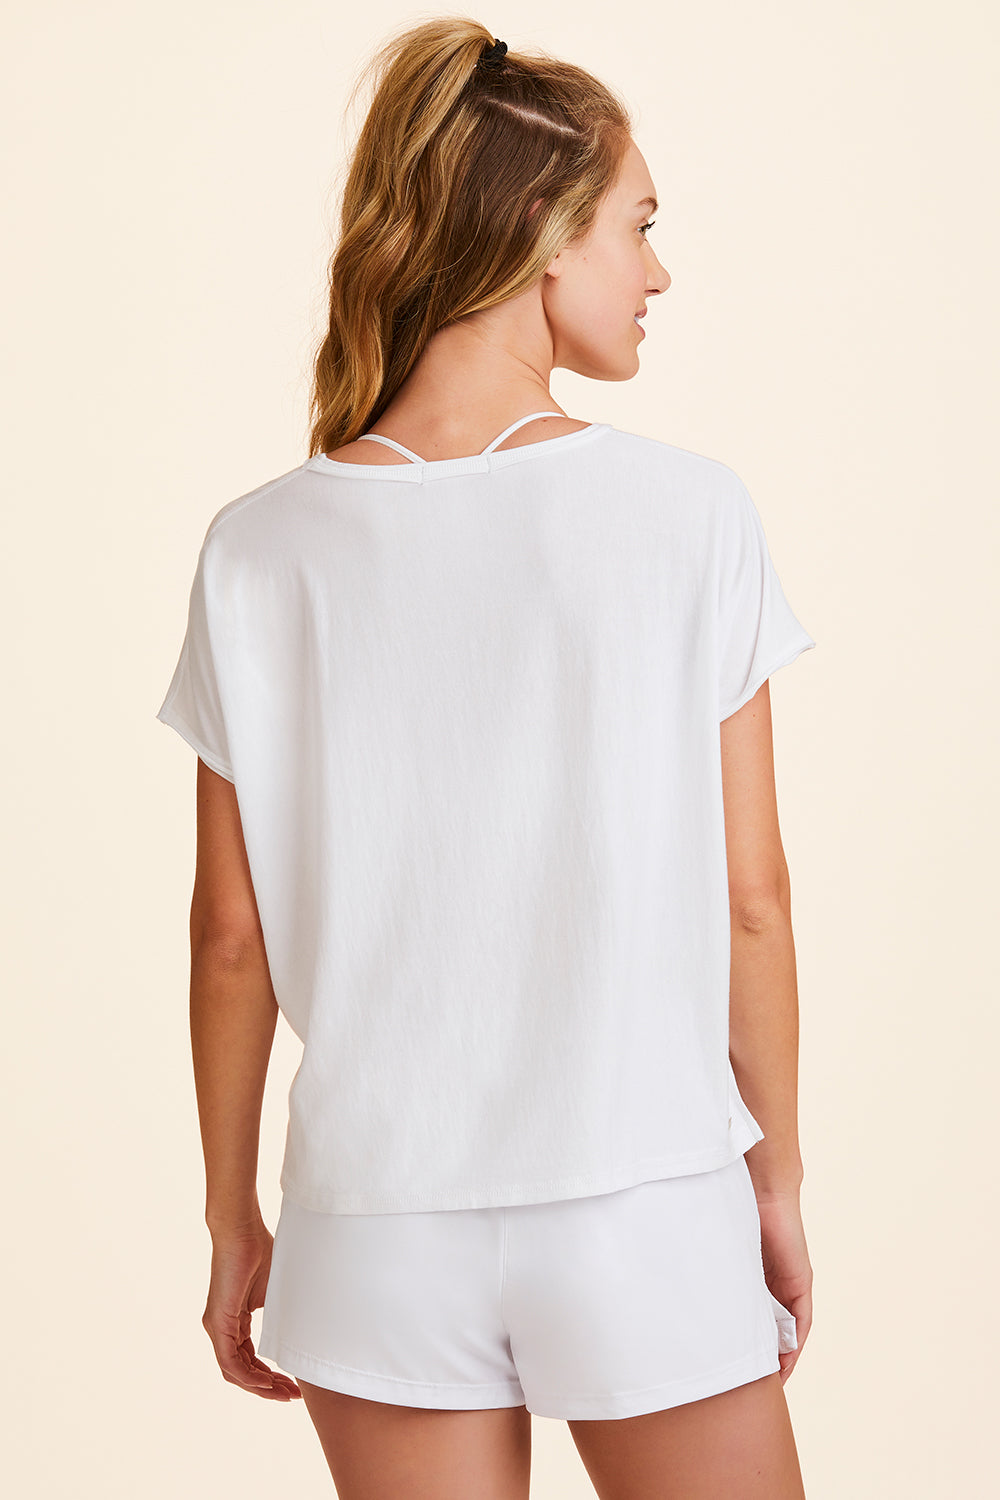 Back view of Alala Women's Luxury Athleisure super-soft tee in solid White